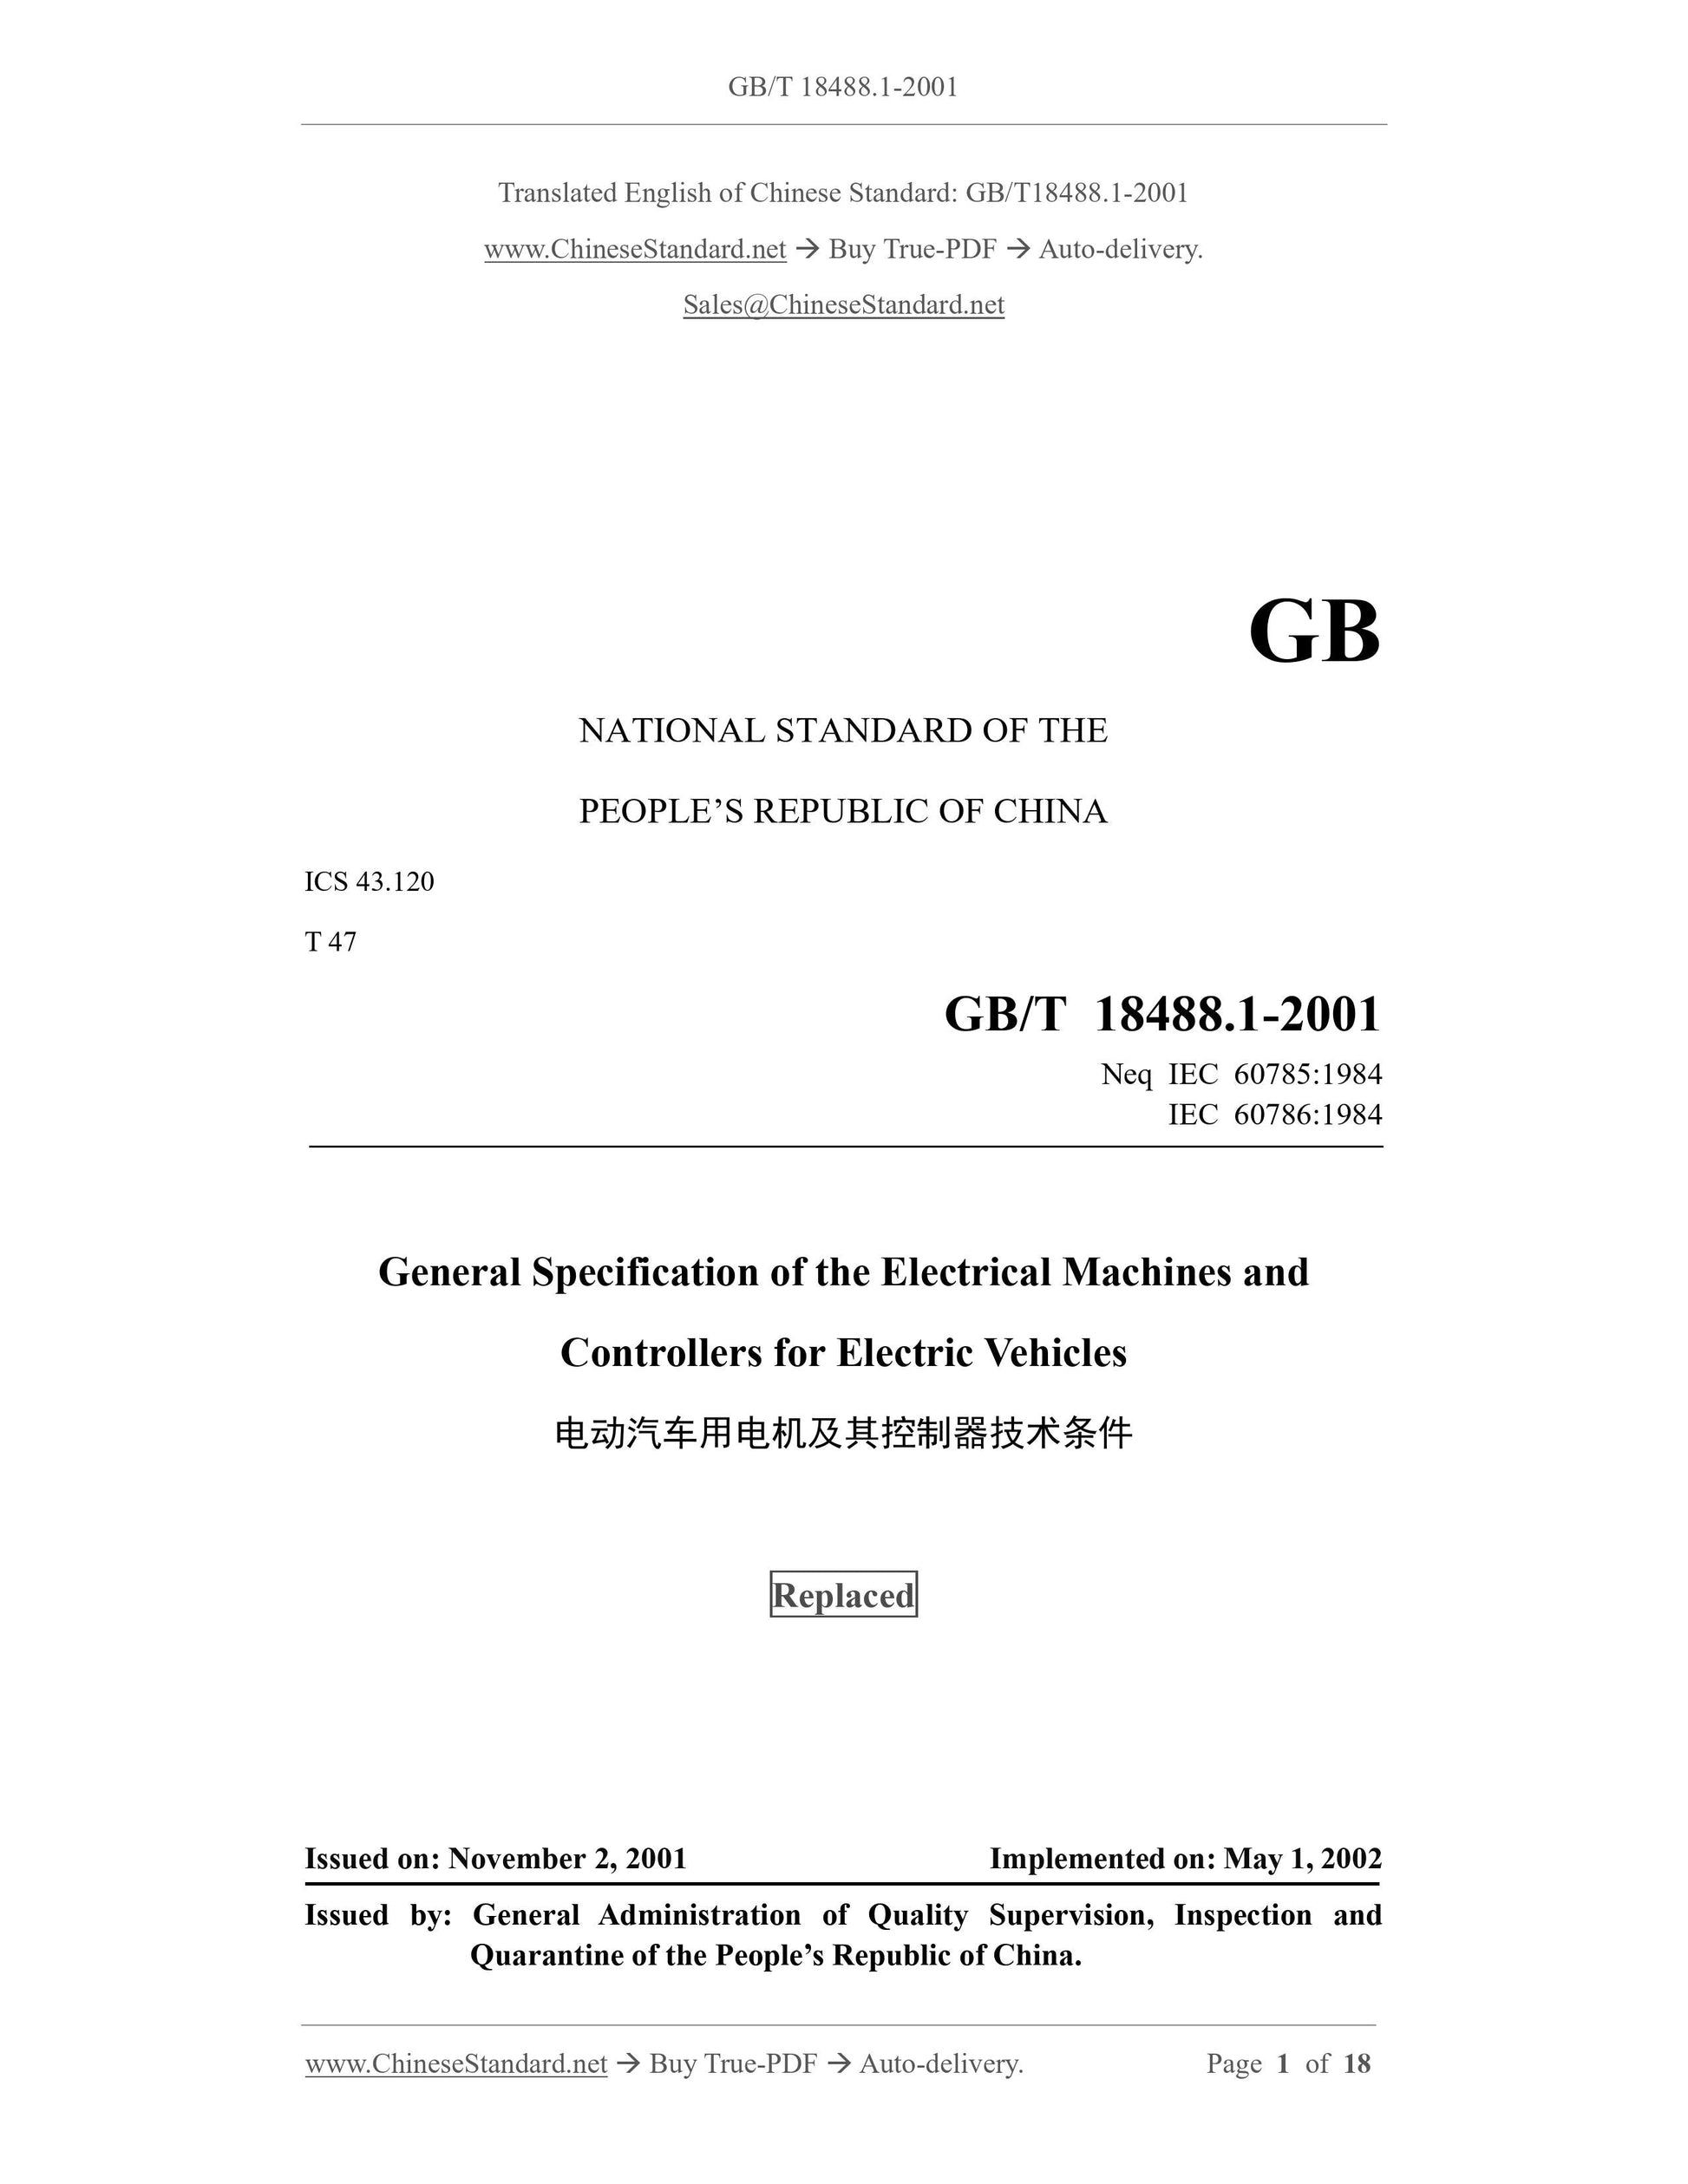 GB/T 18488.1-2001 Page 1